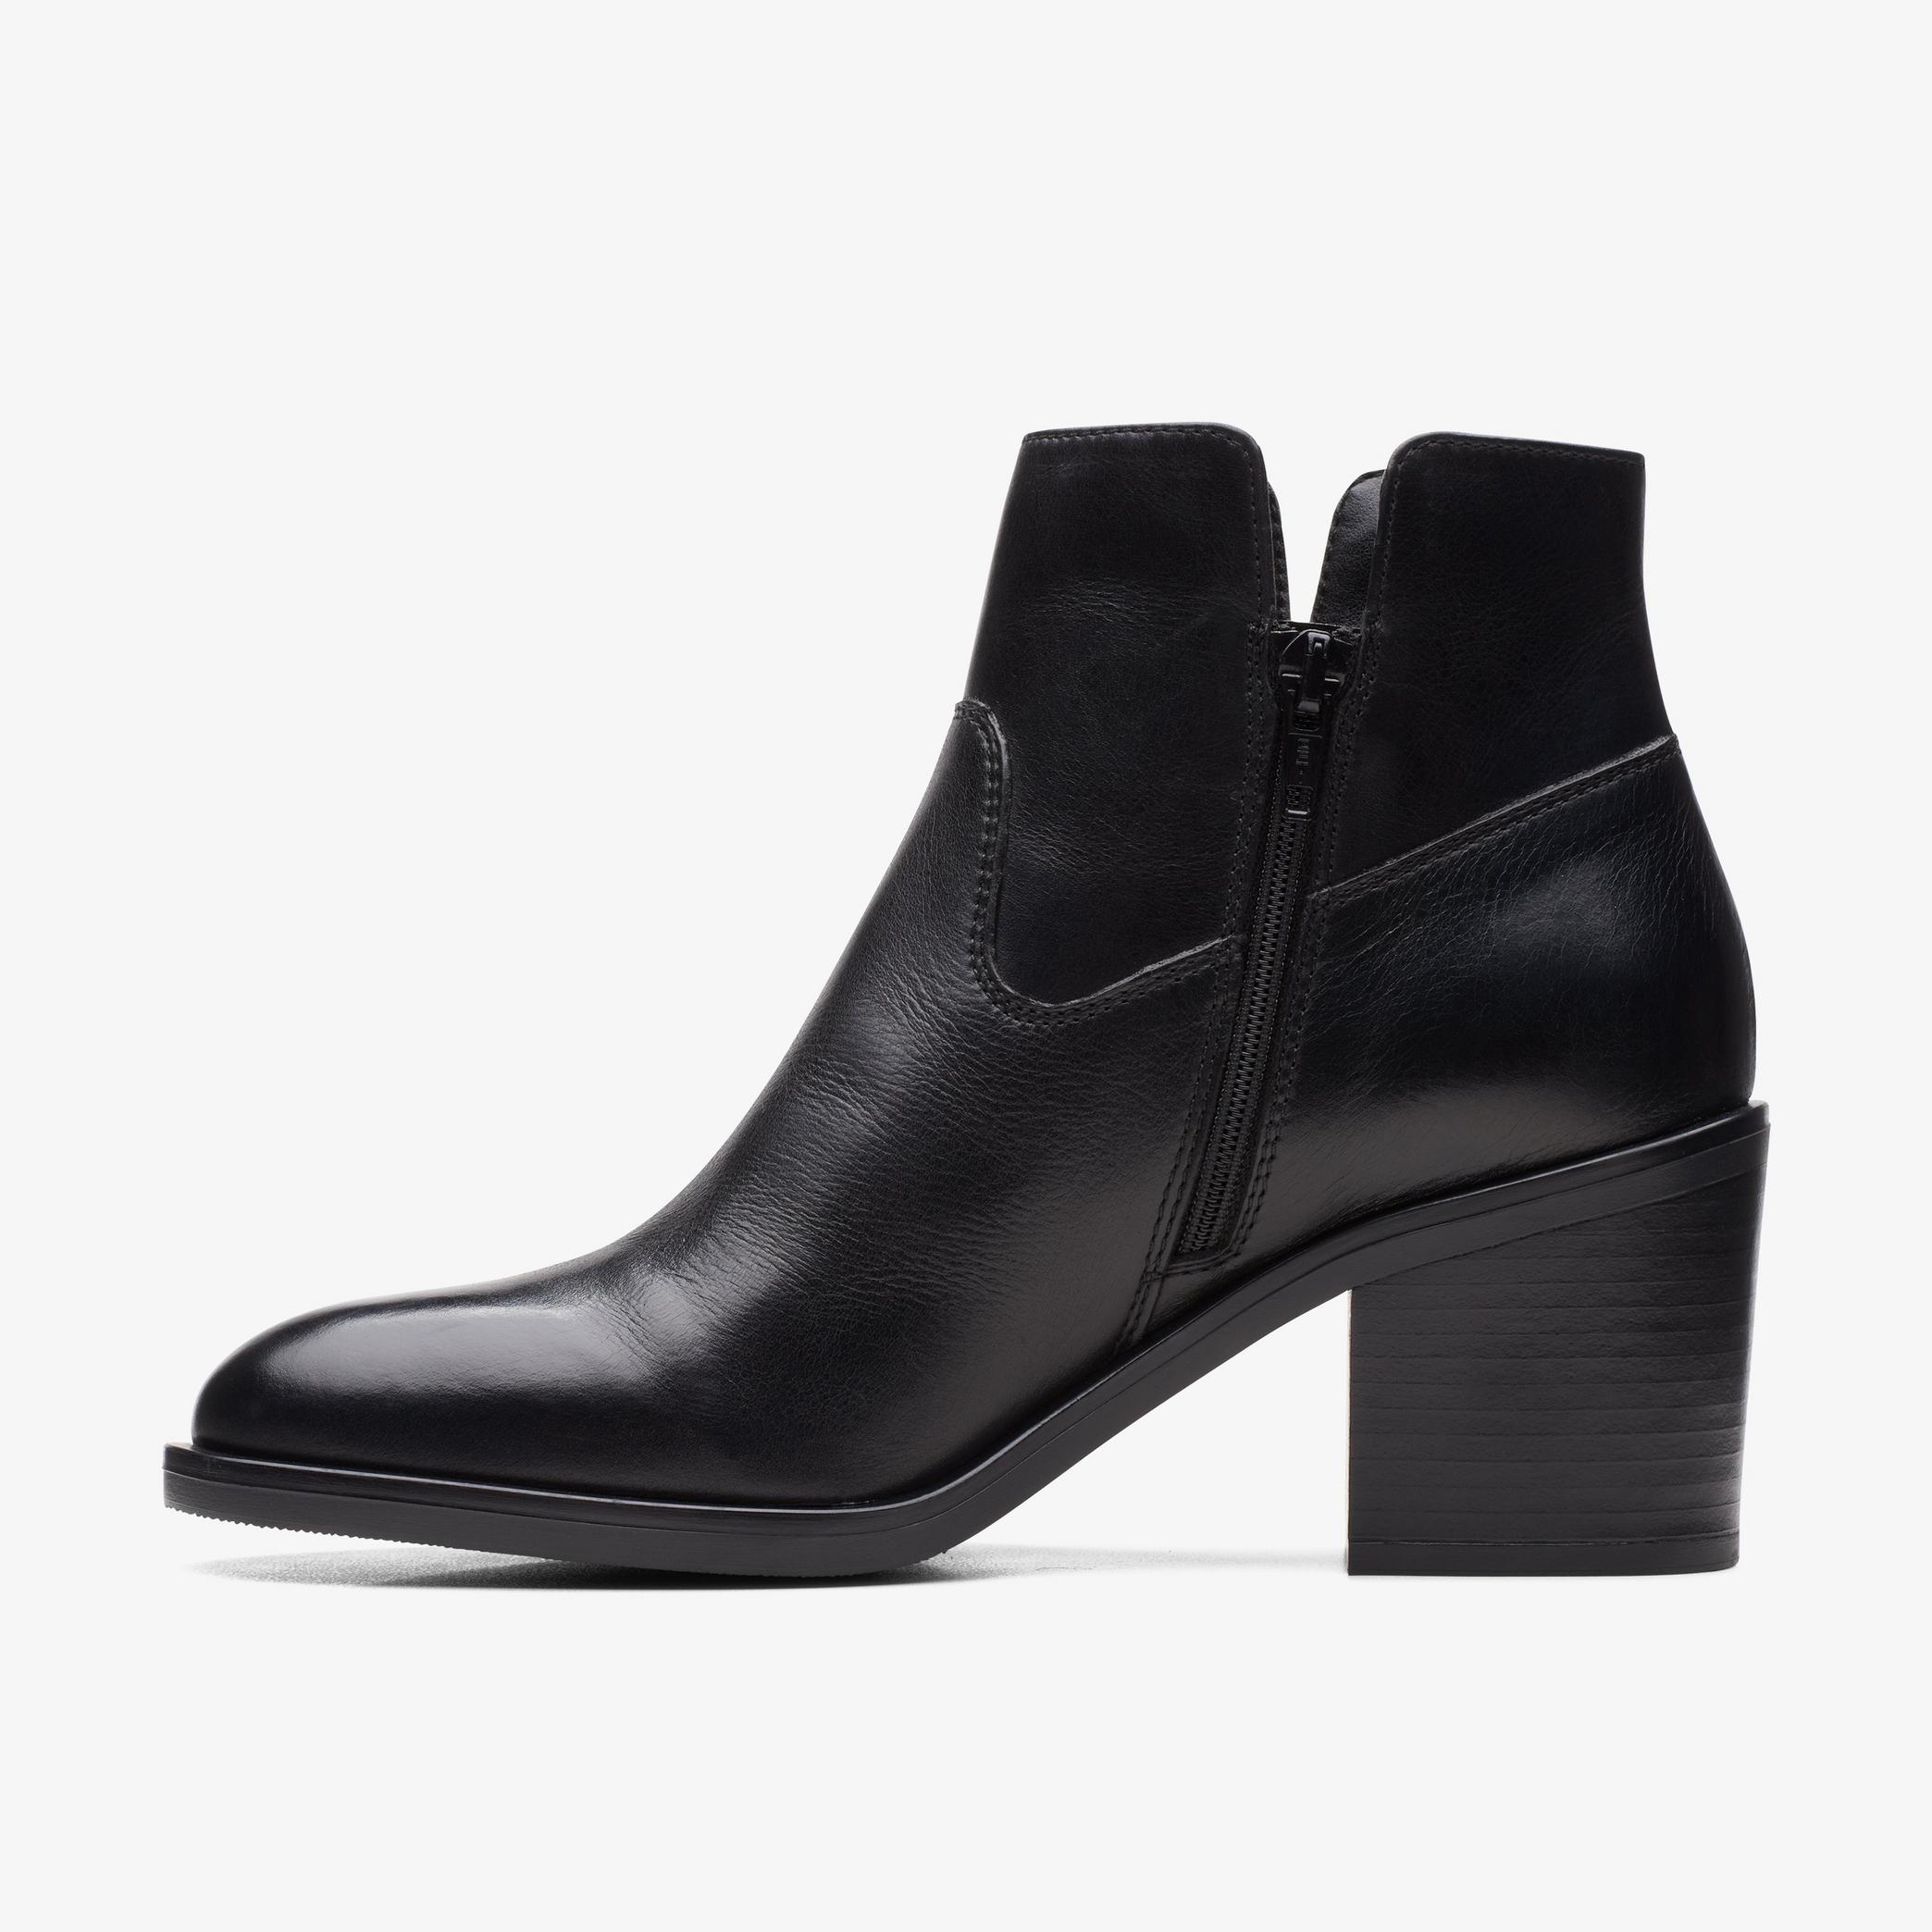 Valvestino Lo Black Leather Ankle Boots, view 3 of 7